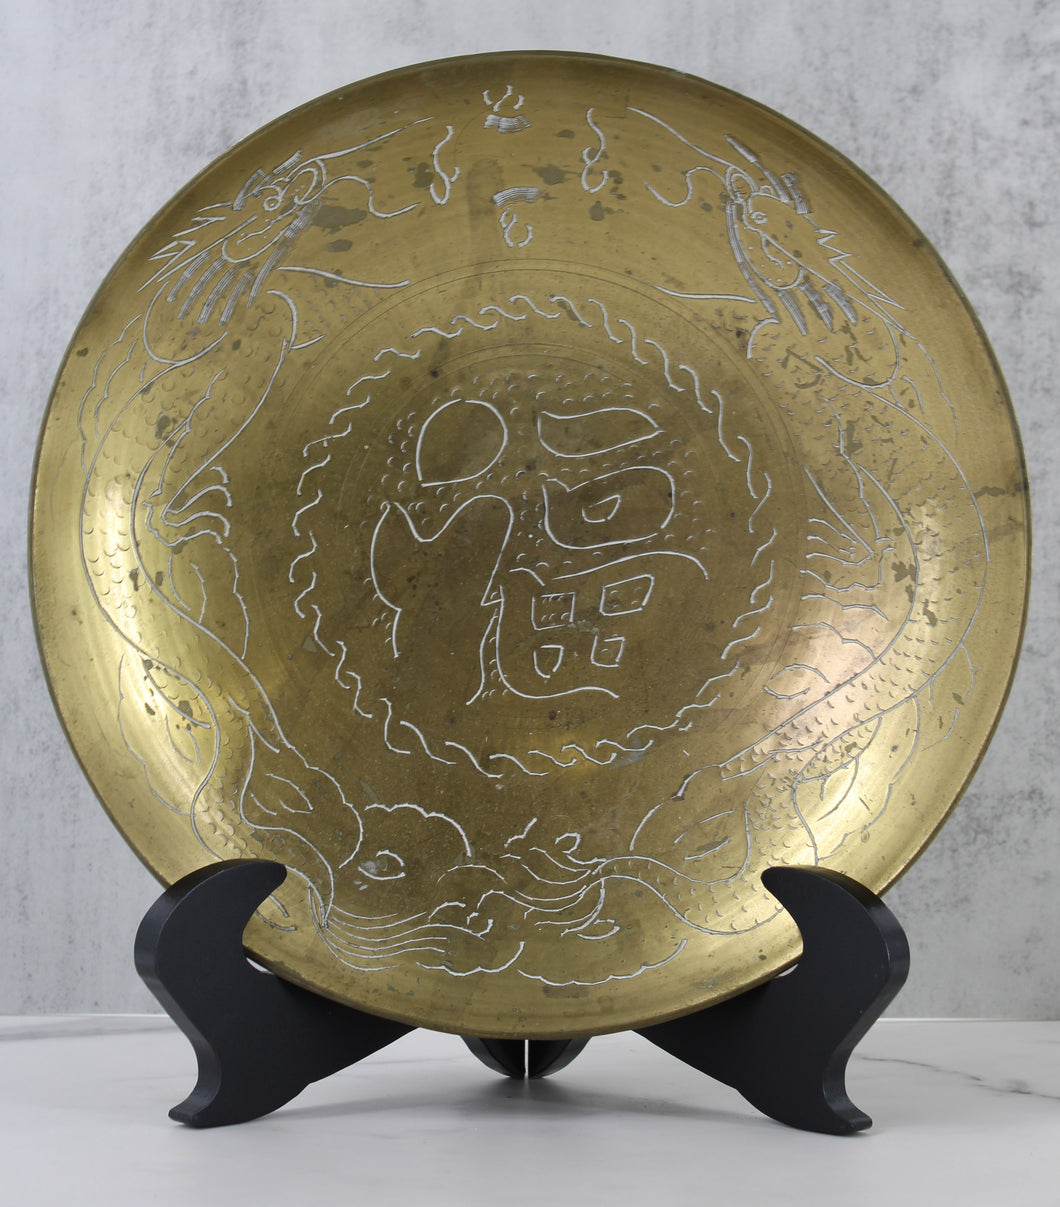 Brass Dish with Dragon Engraving